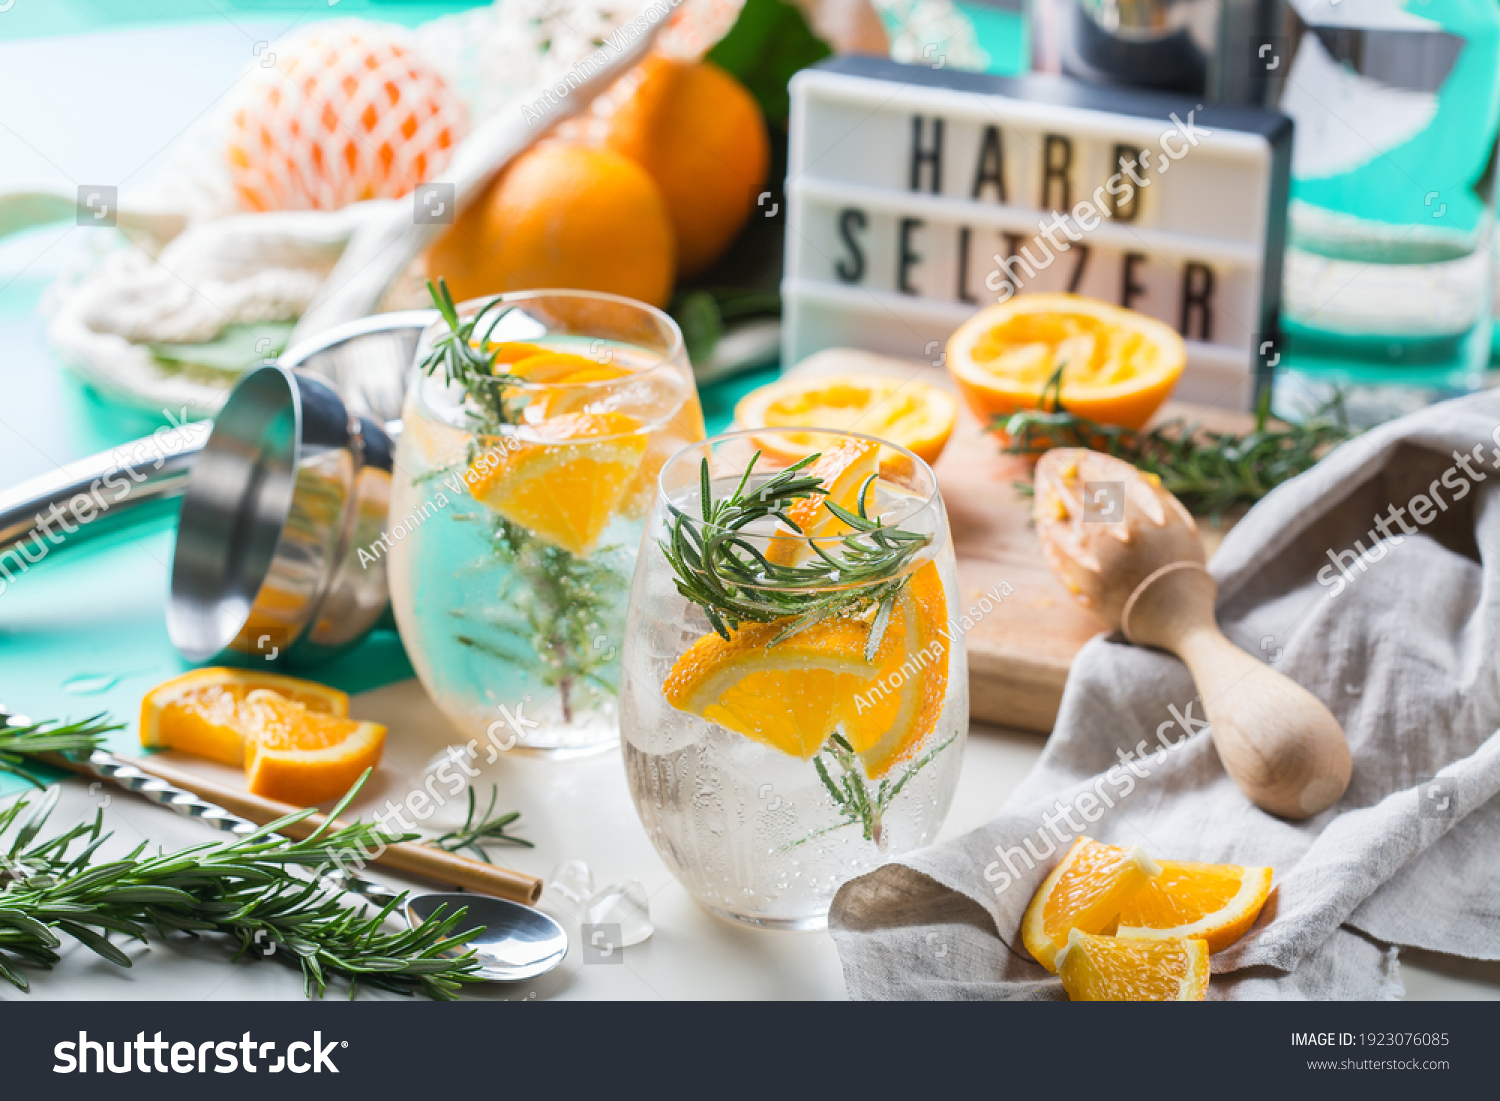 Hard seltzer cocktail with orange, rosemary and ice on a table. Summer refreshing beverage, drink with trendy zero waste accessories, bamboo straw and mesh bag. #1923076085